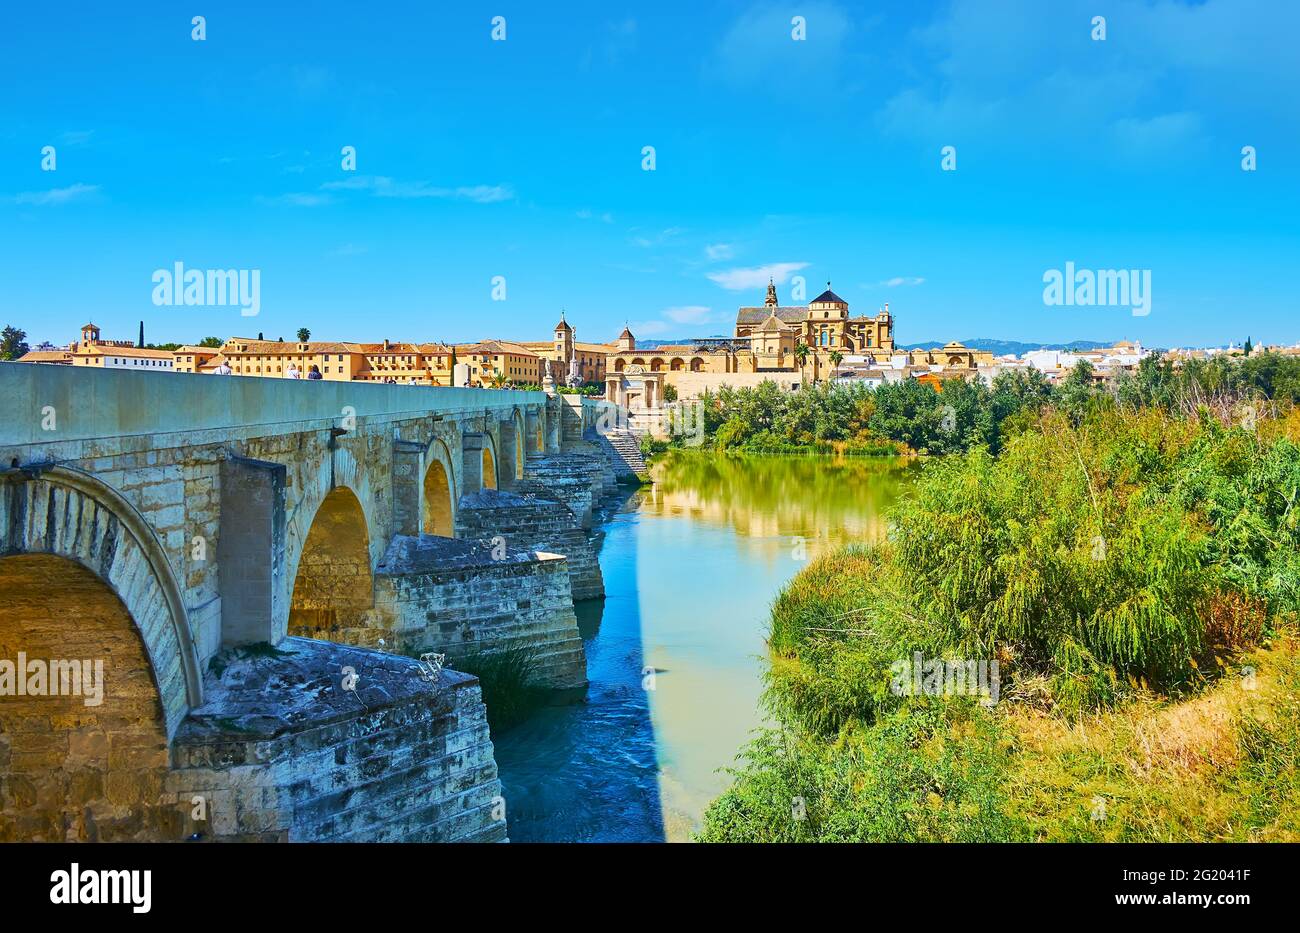 The pleasant walk along the bank of Guadalquivir River with a view of the most significant landmarks of Cordoba - the ancient Roman Bridge and Mezquit Stock Photo